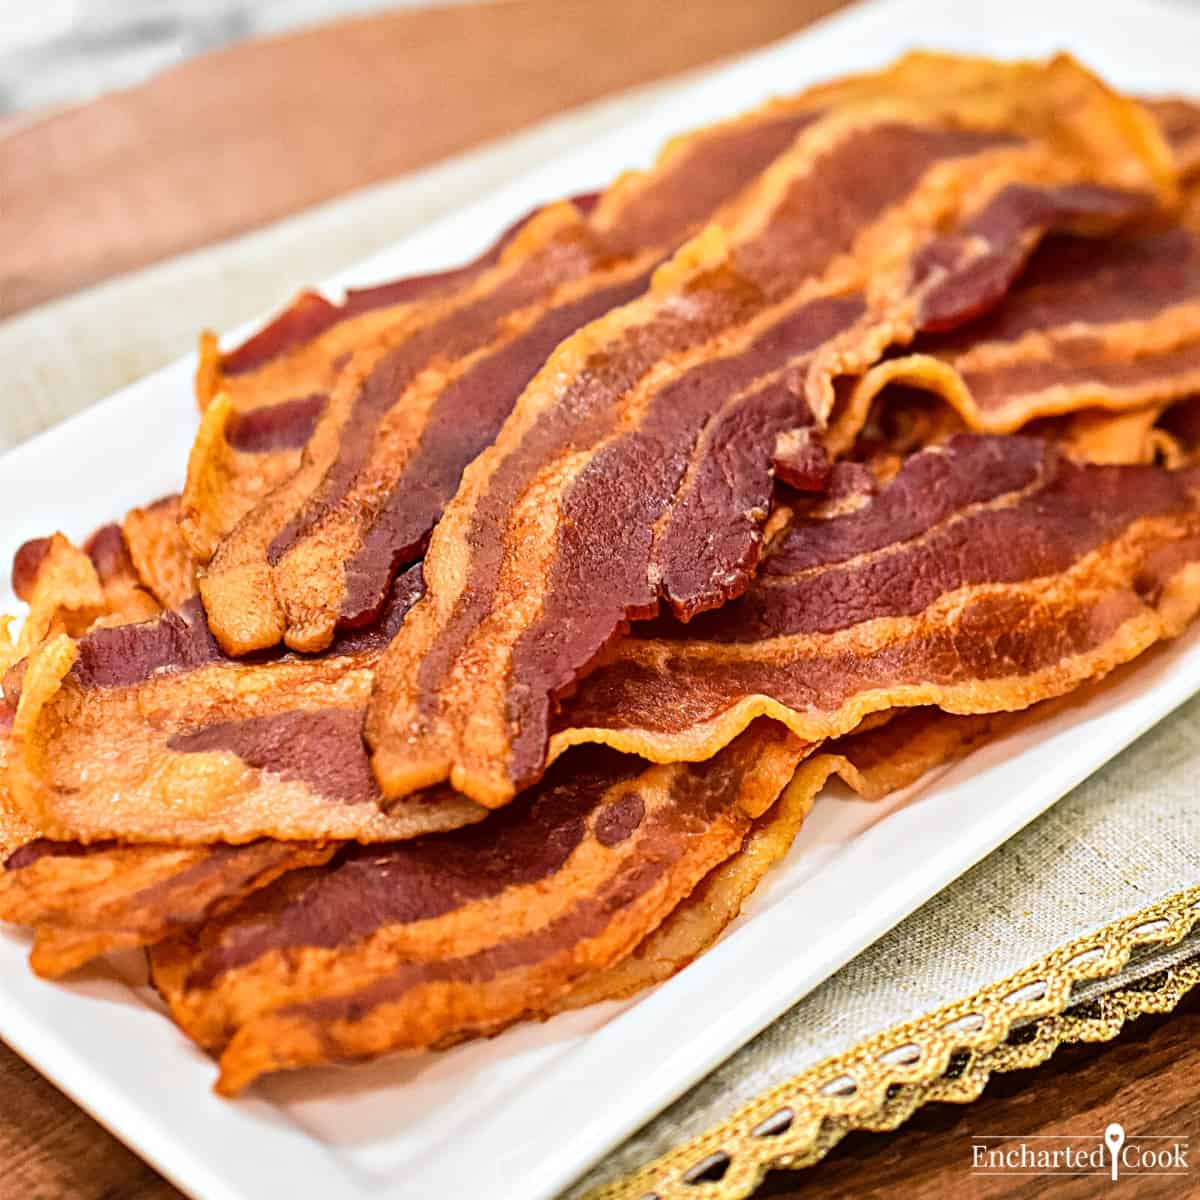 Close up view of cooked bacon on a white plate with a beige linen napkin.